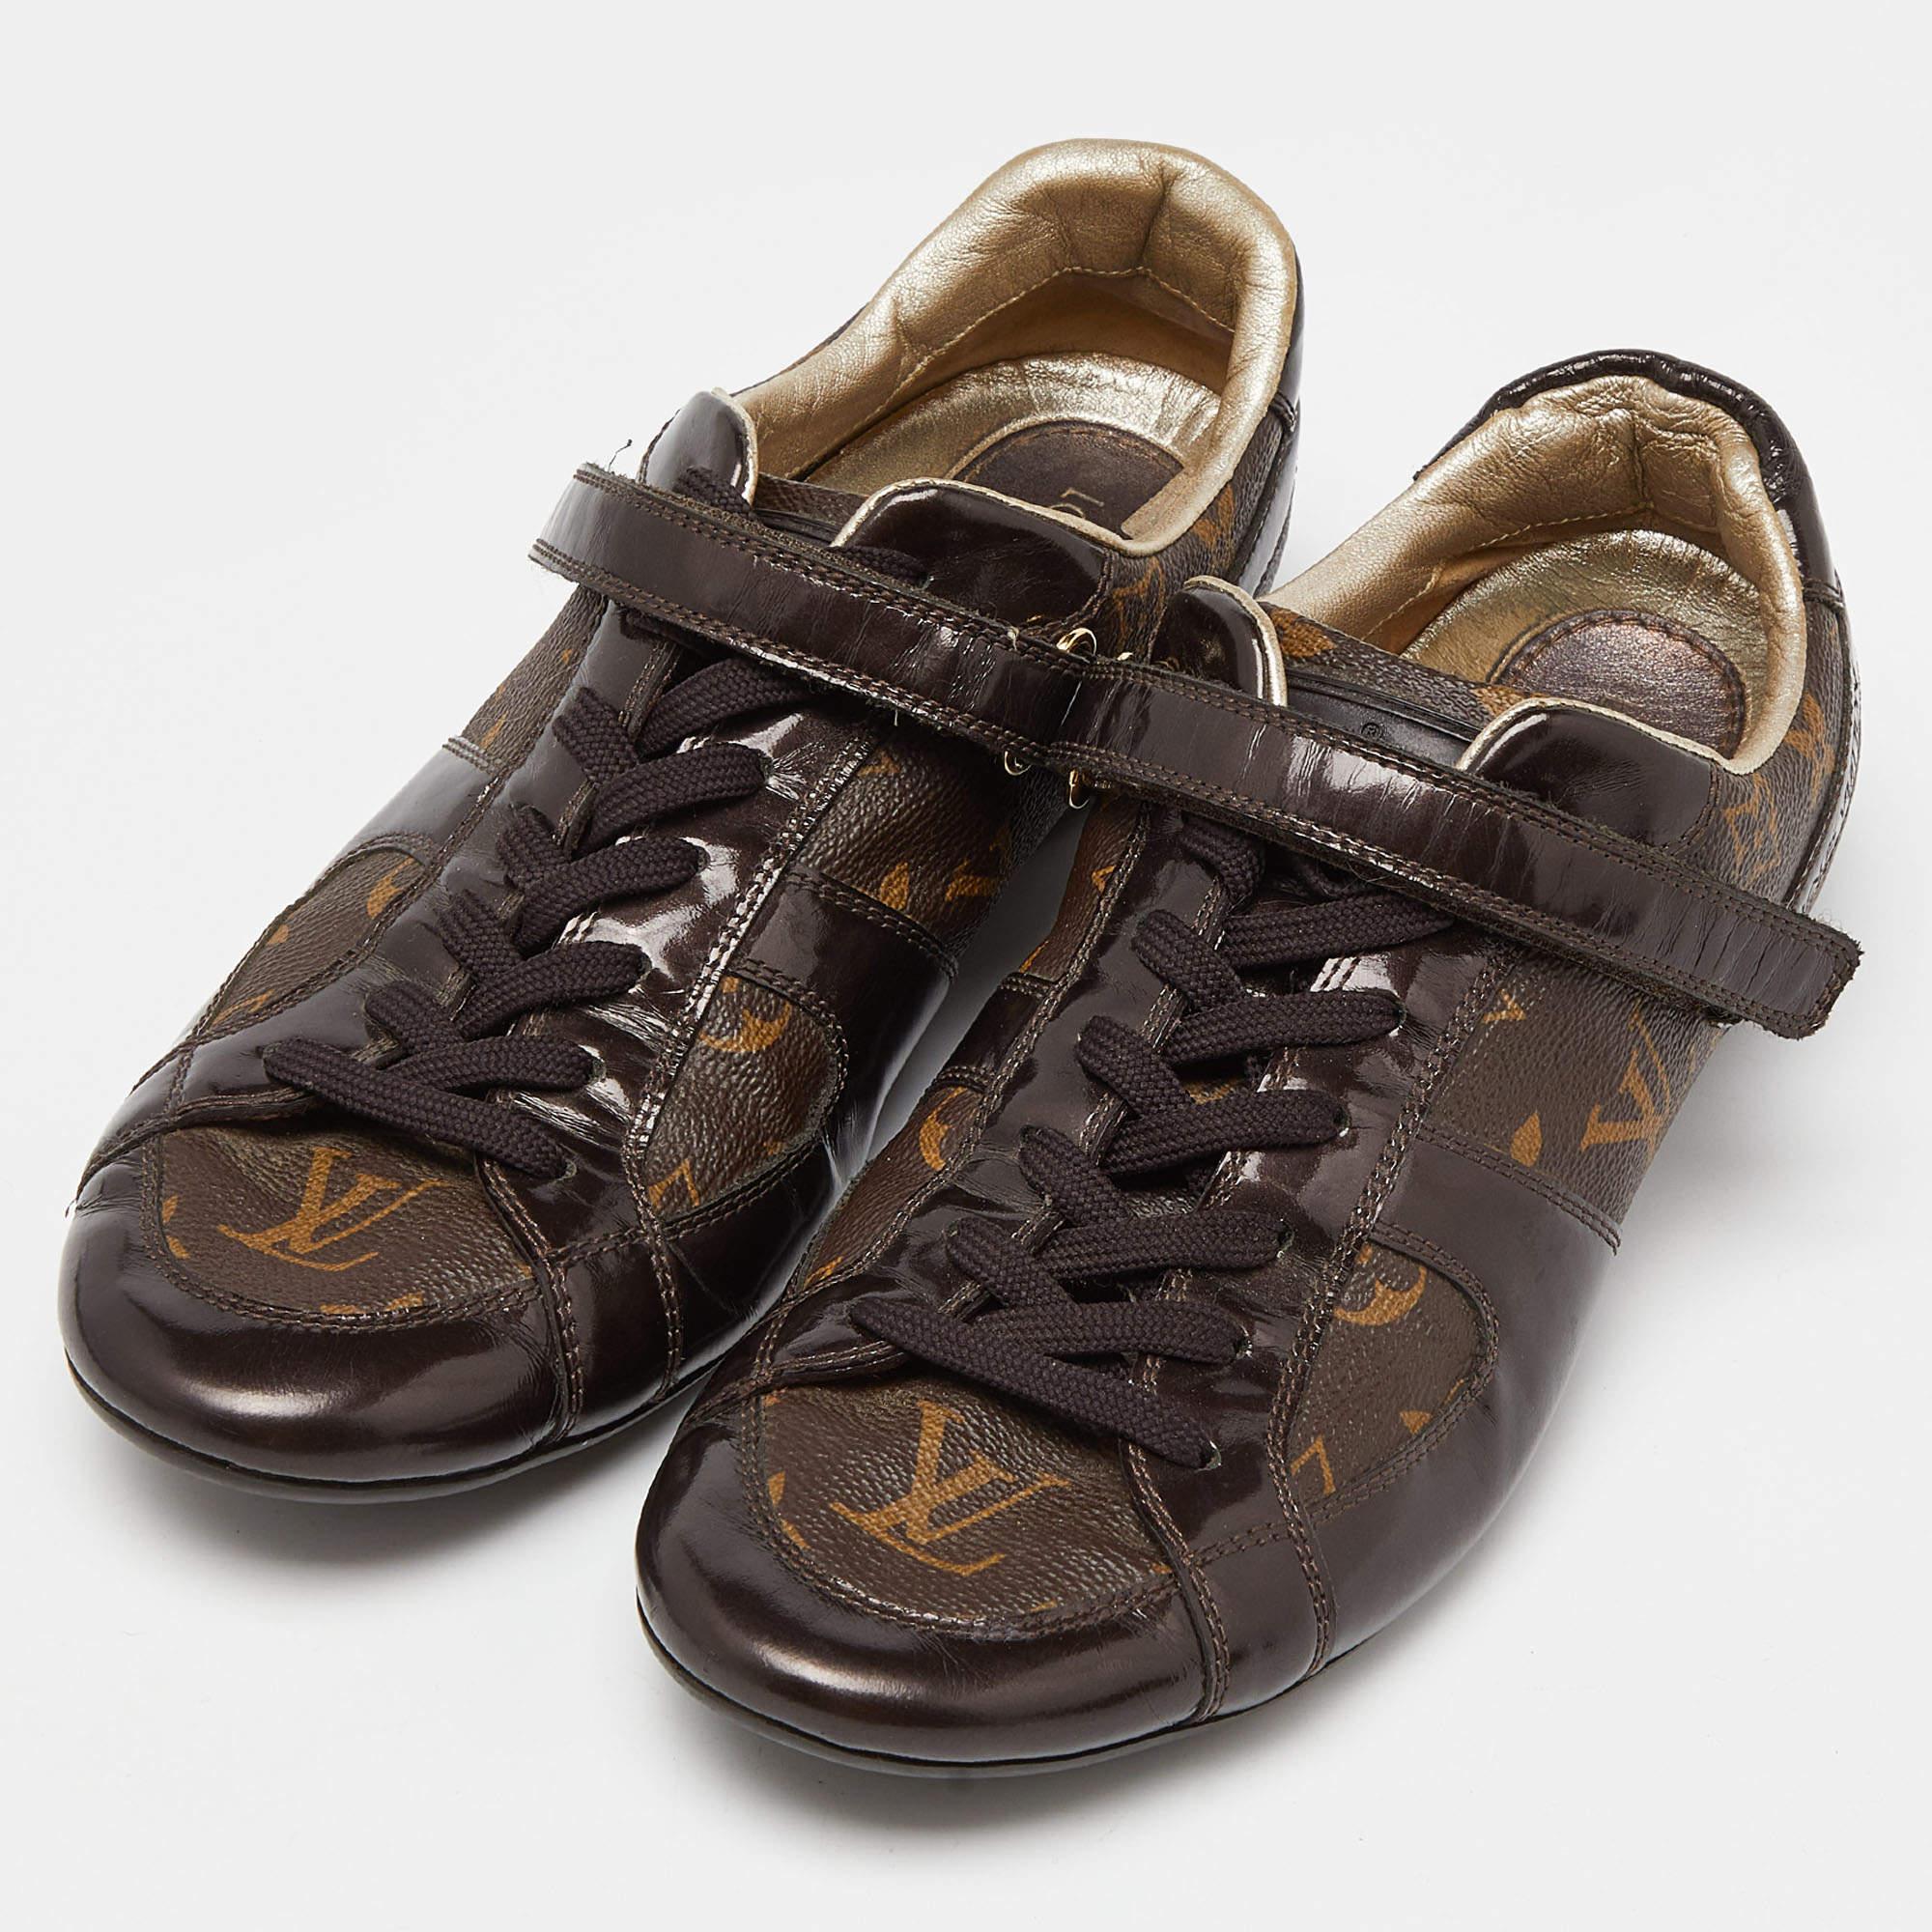 Louis Vuitton Brown Monogram Canvas and Patent Leather Gloe Trotter Sneakers Siz 1